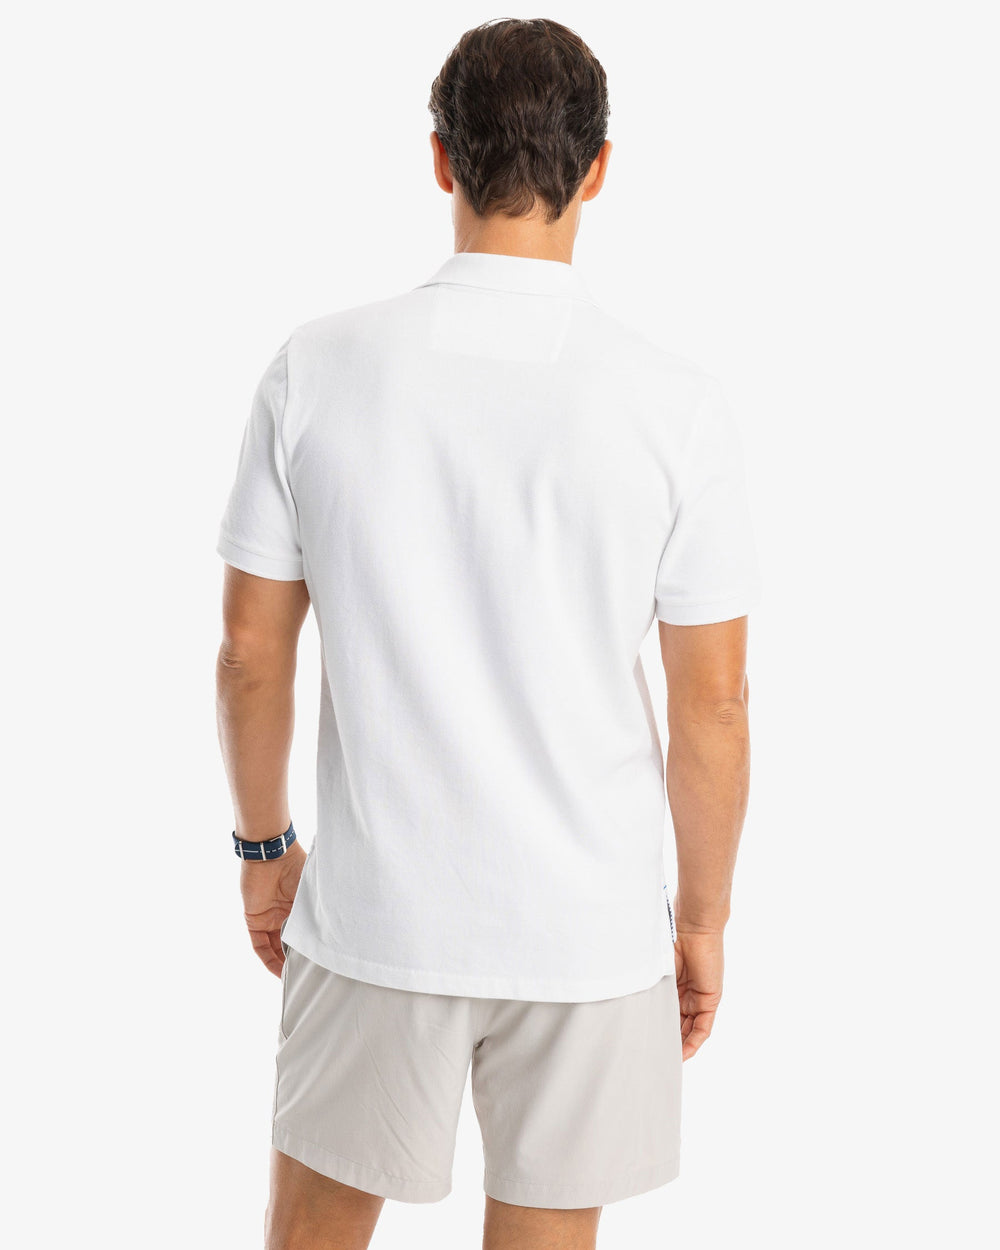 The model back view of the Men's New Skipjack Polo Shirt by Southern Tide - Classic White